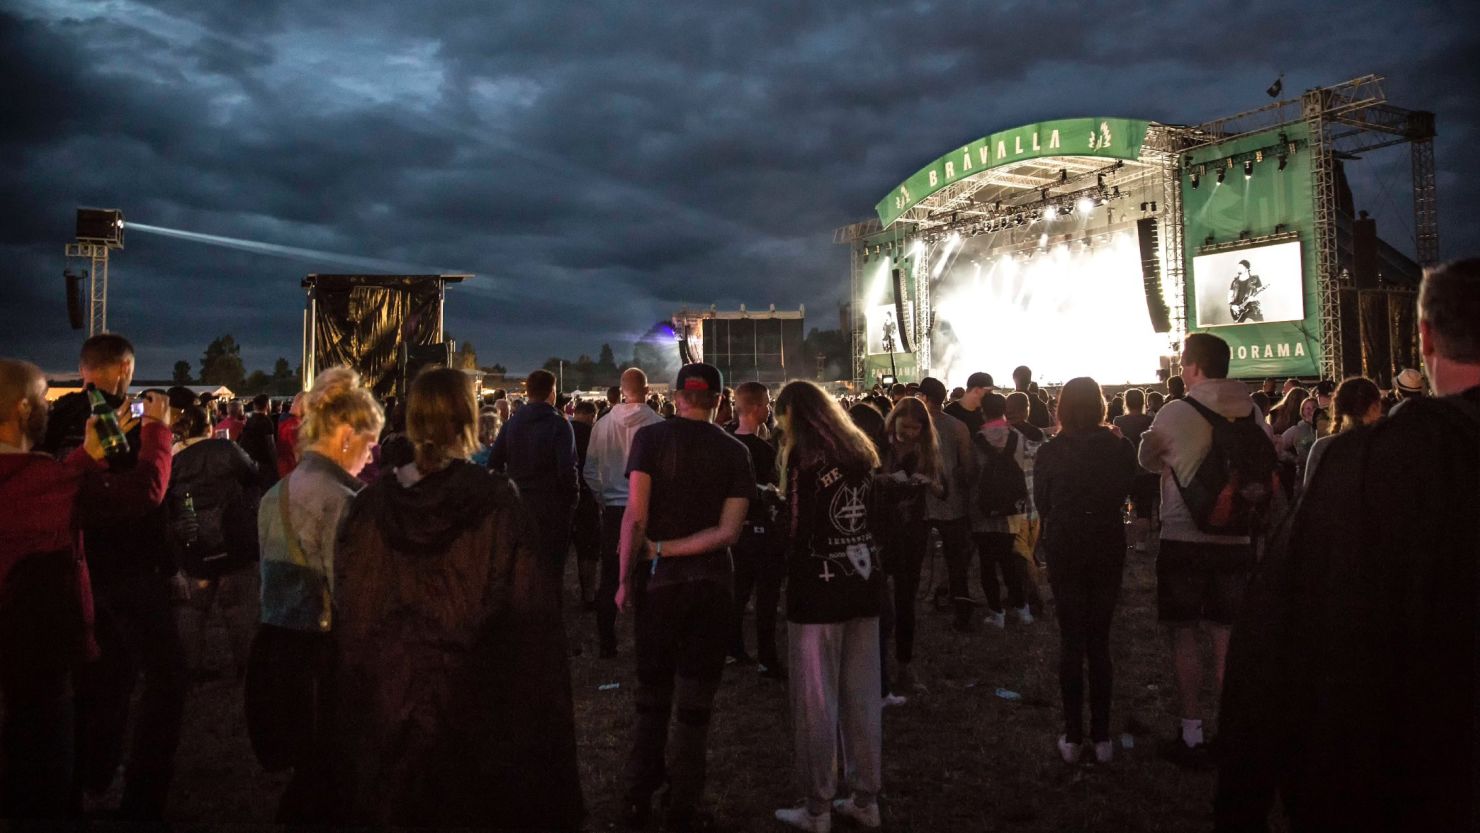 Bravalla is a four-day music festival held annually near the Swedish city of Norrkoping.